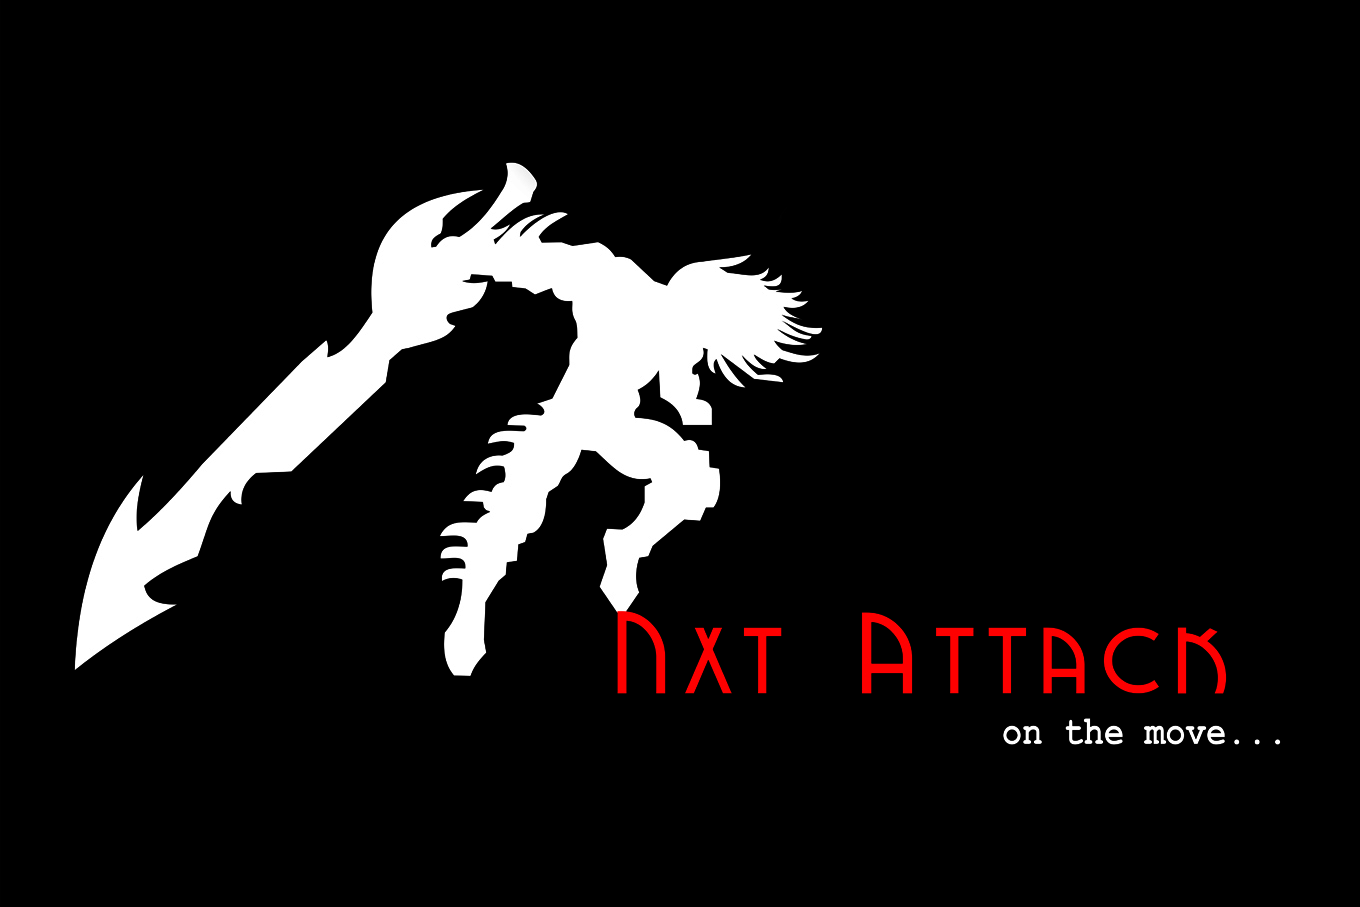 NXT ATTACK